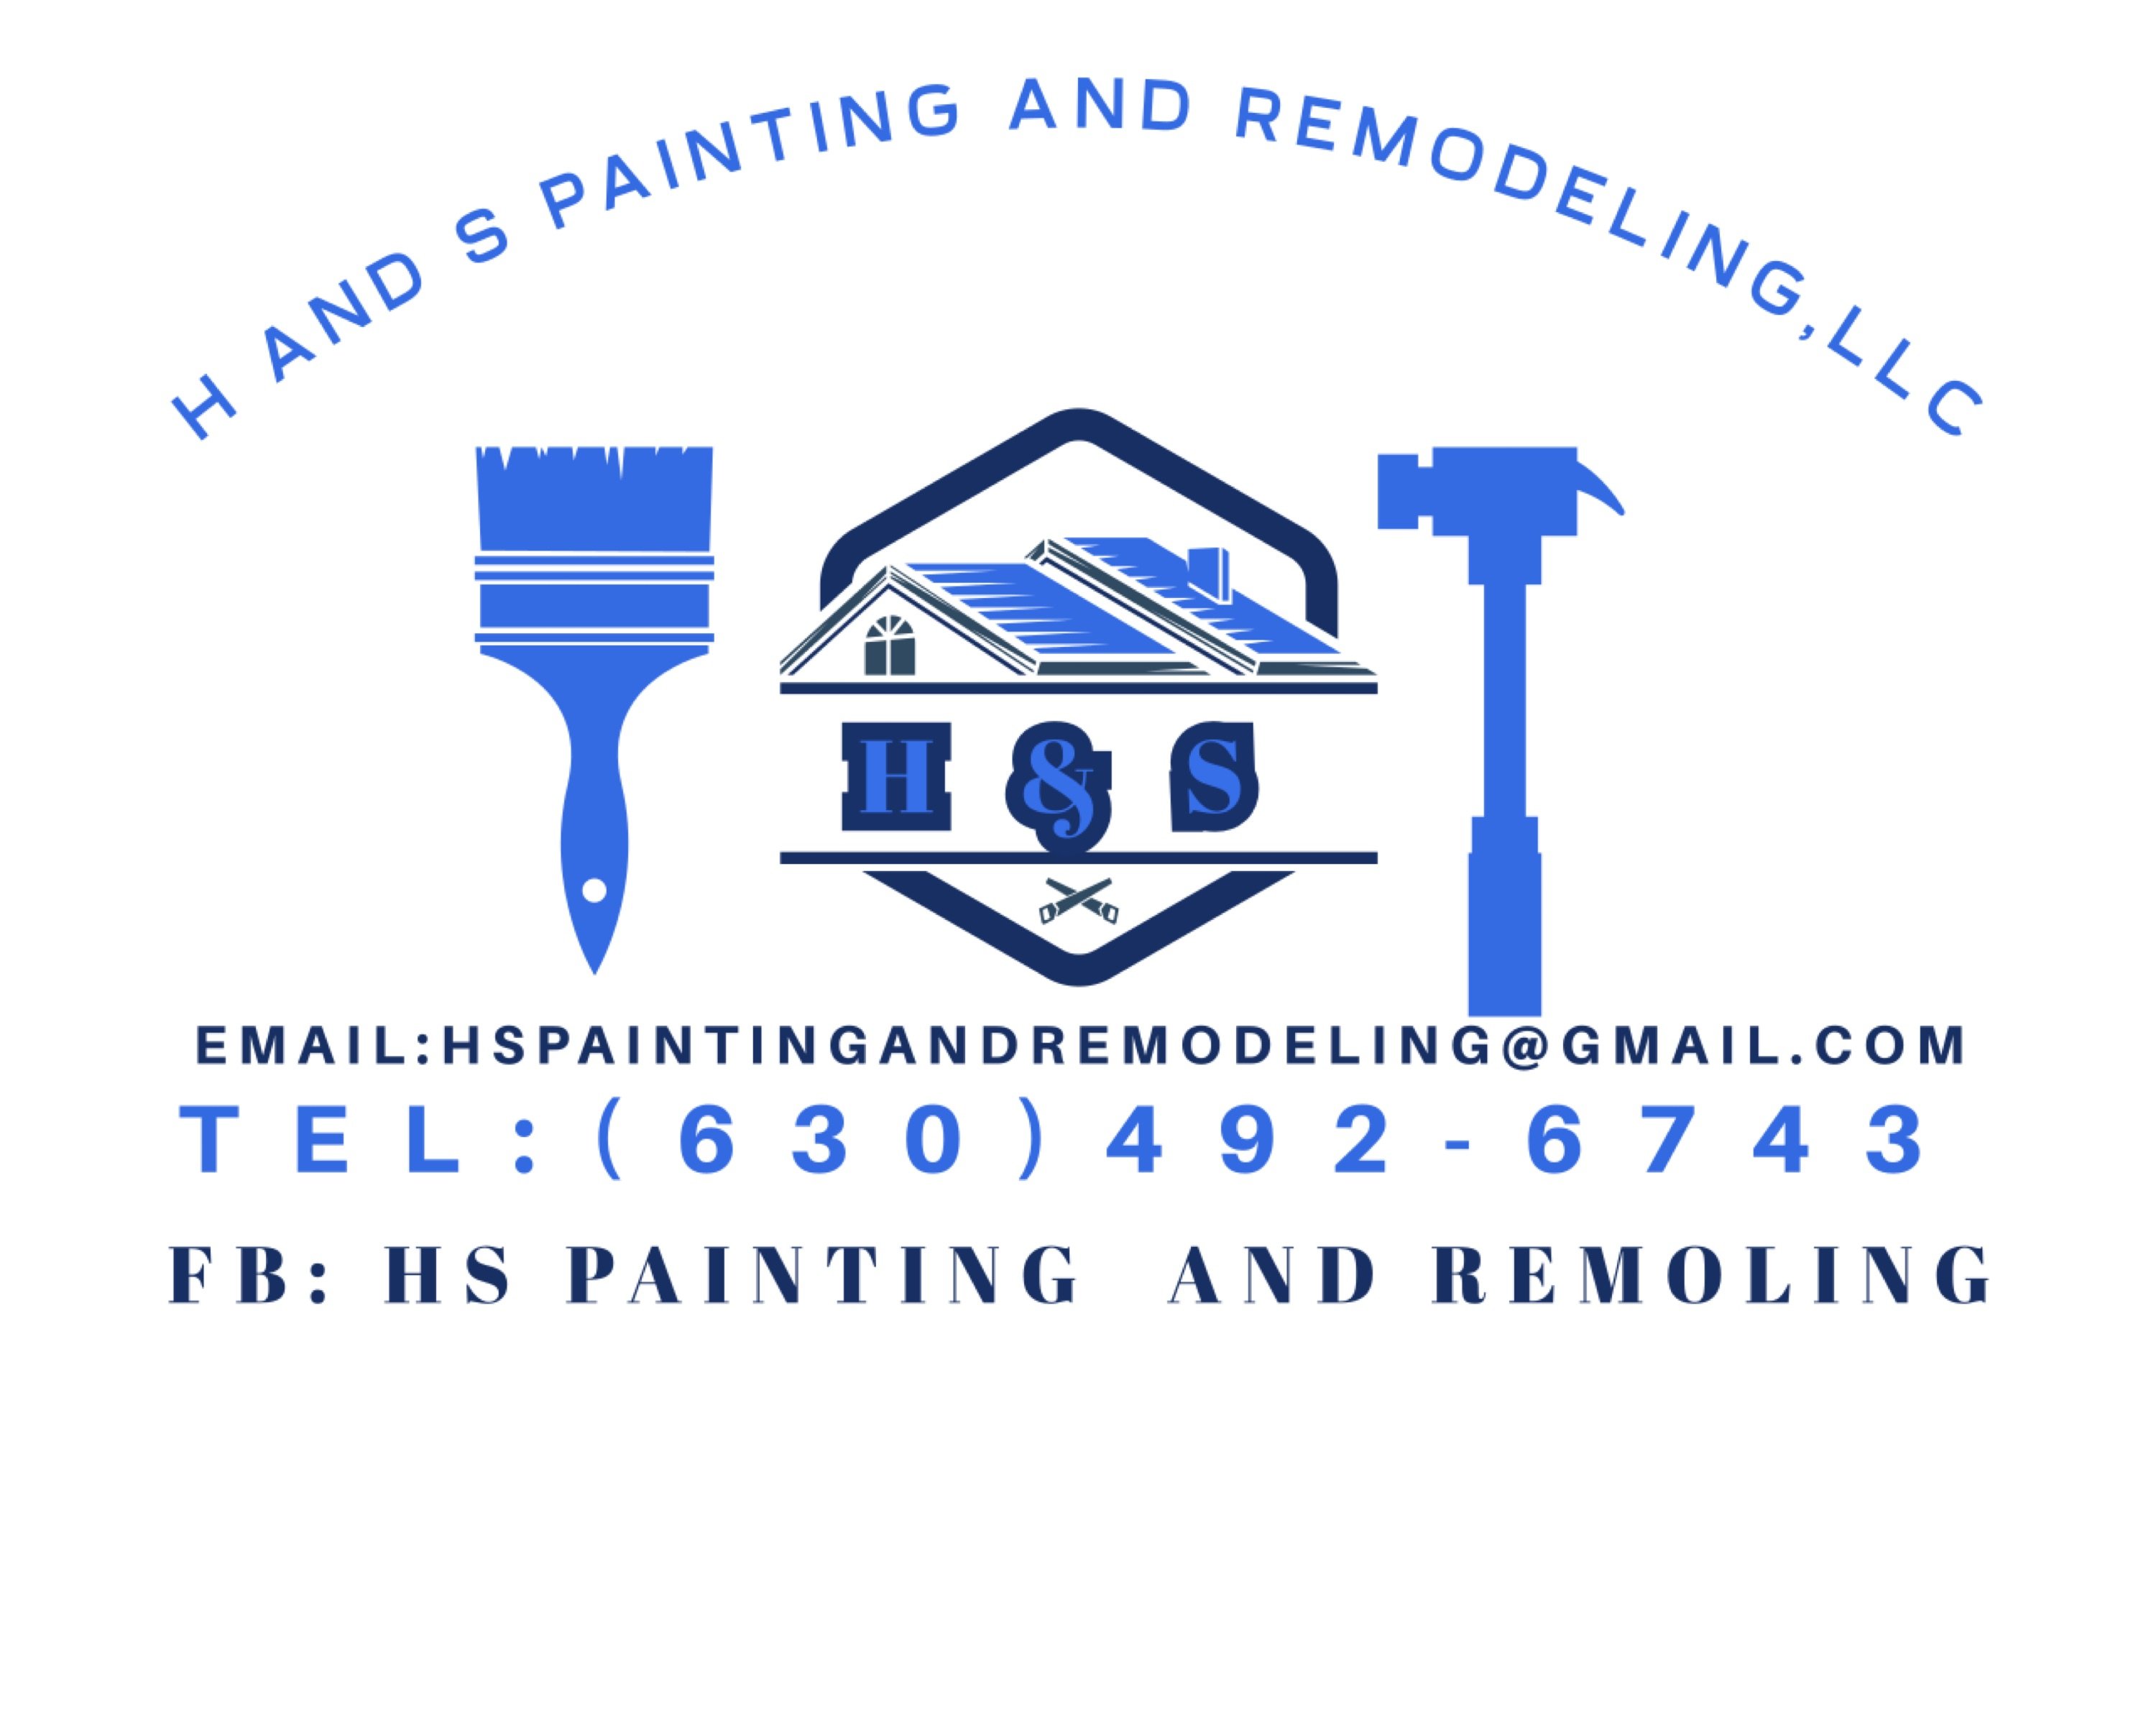 H and S Painting and Remodeling, LLC Logo